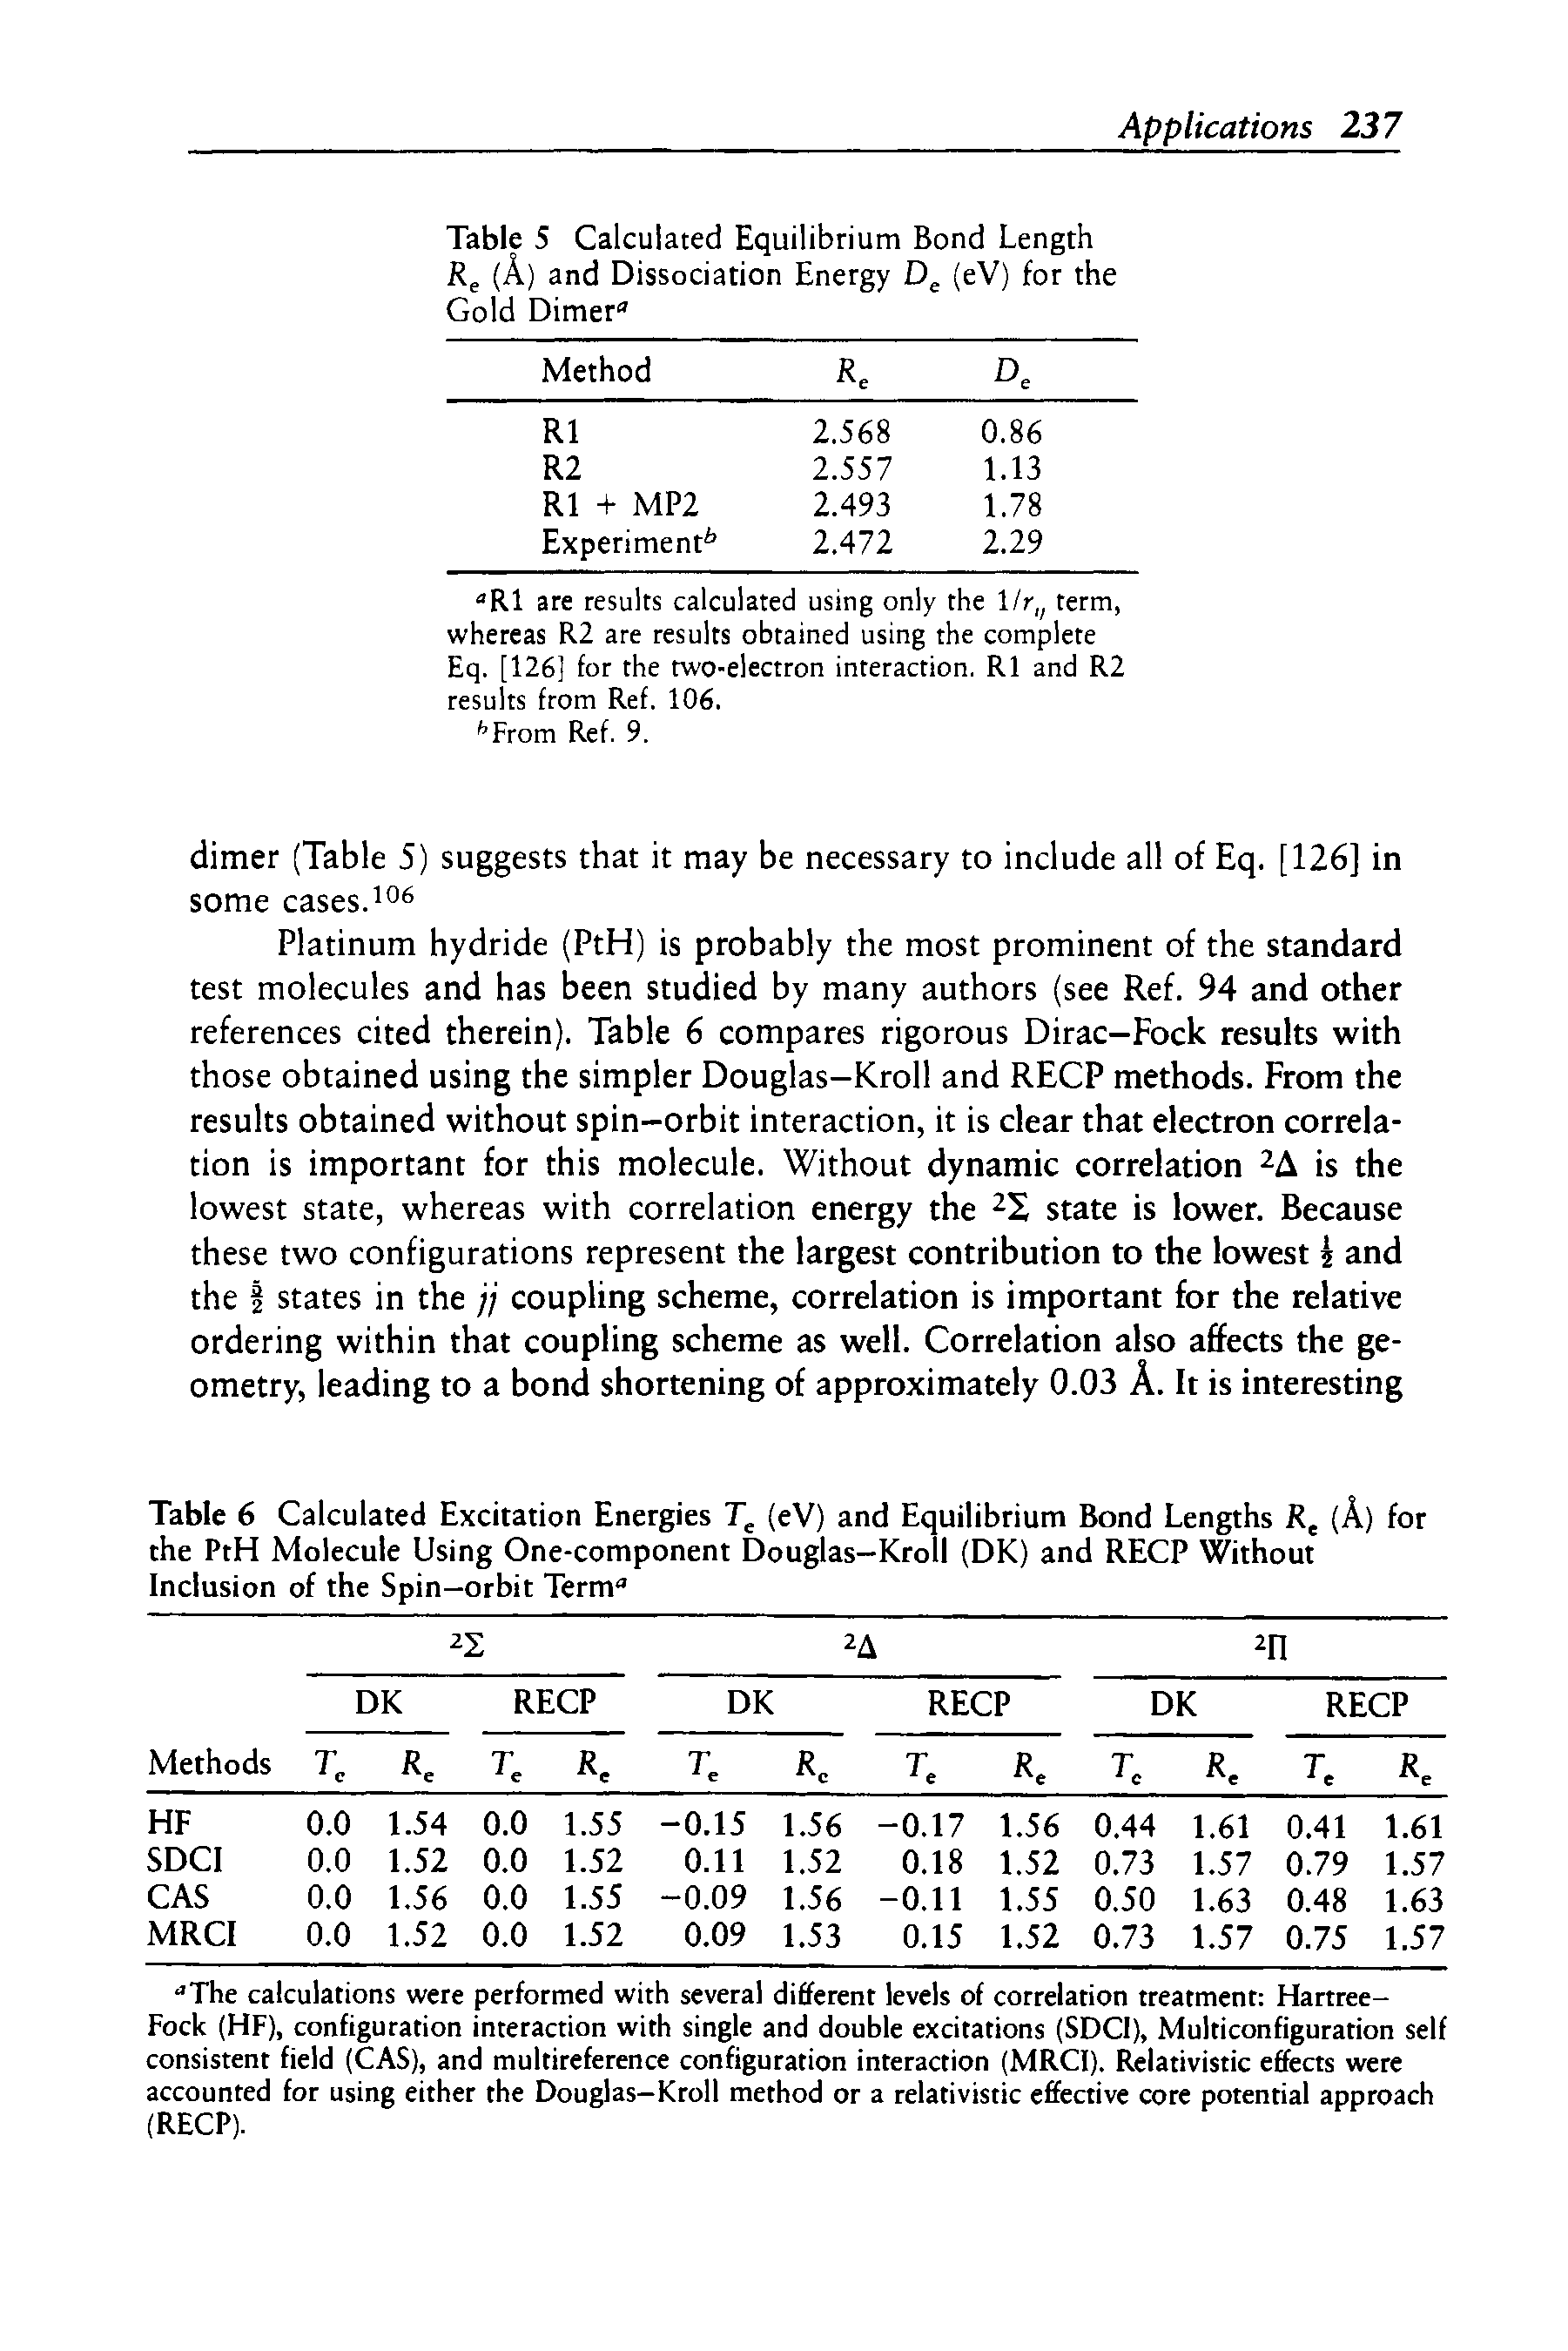 Table S Calculated Equilibrium Bond Length (A) and Dissociation Energy (eV) for the Gold Dimer ...